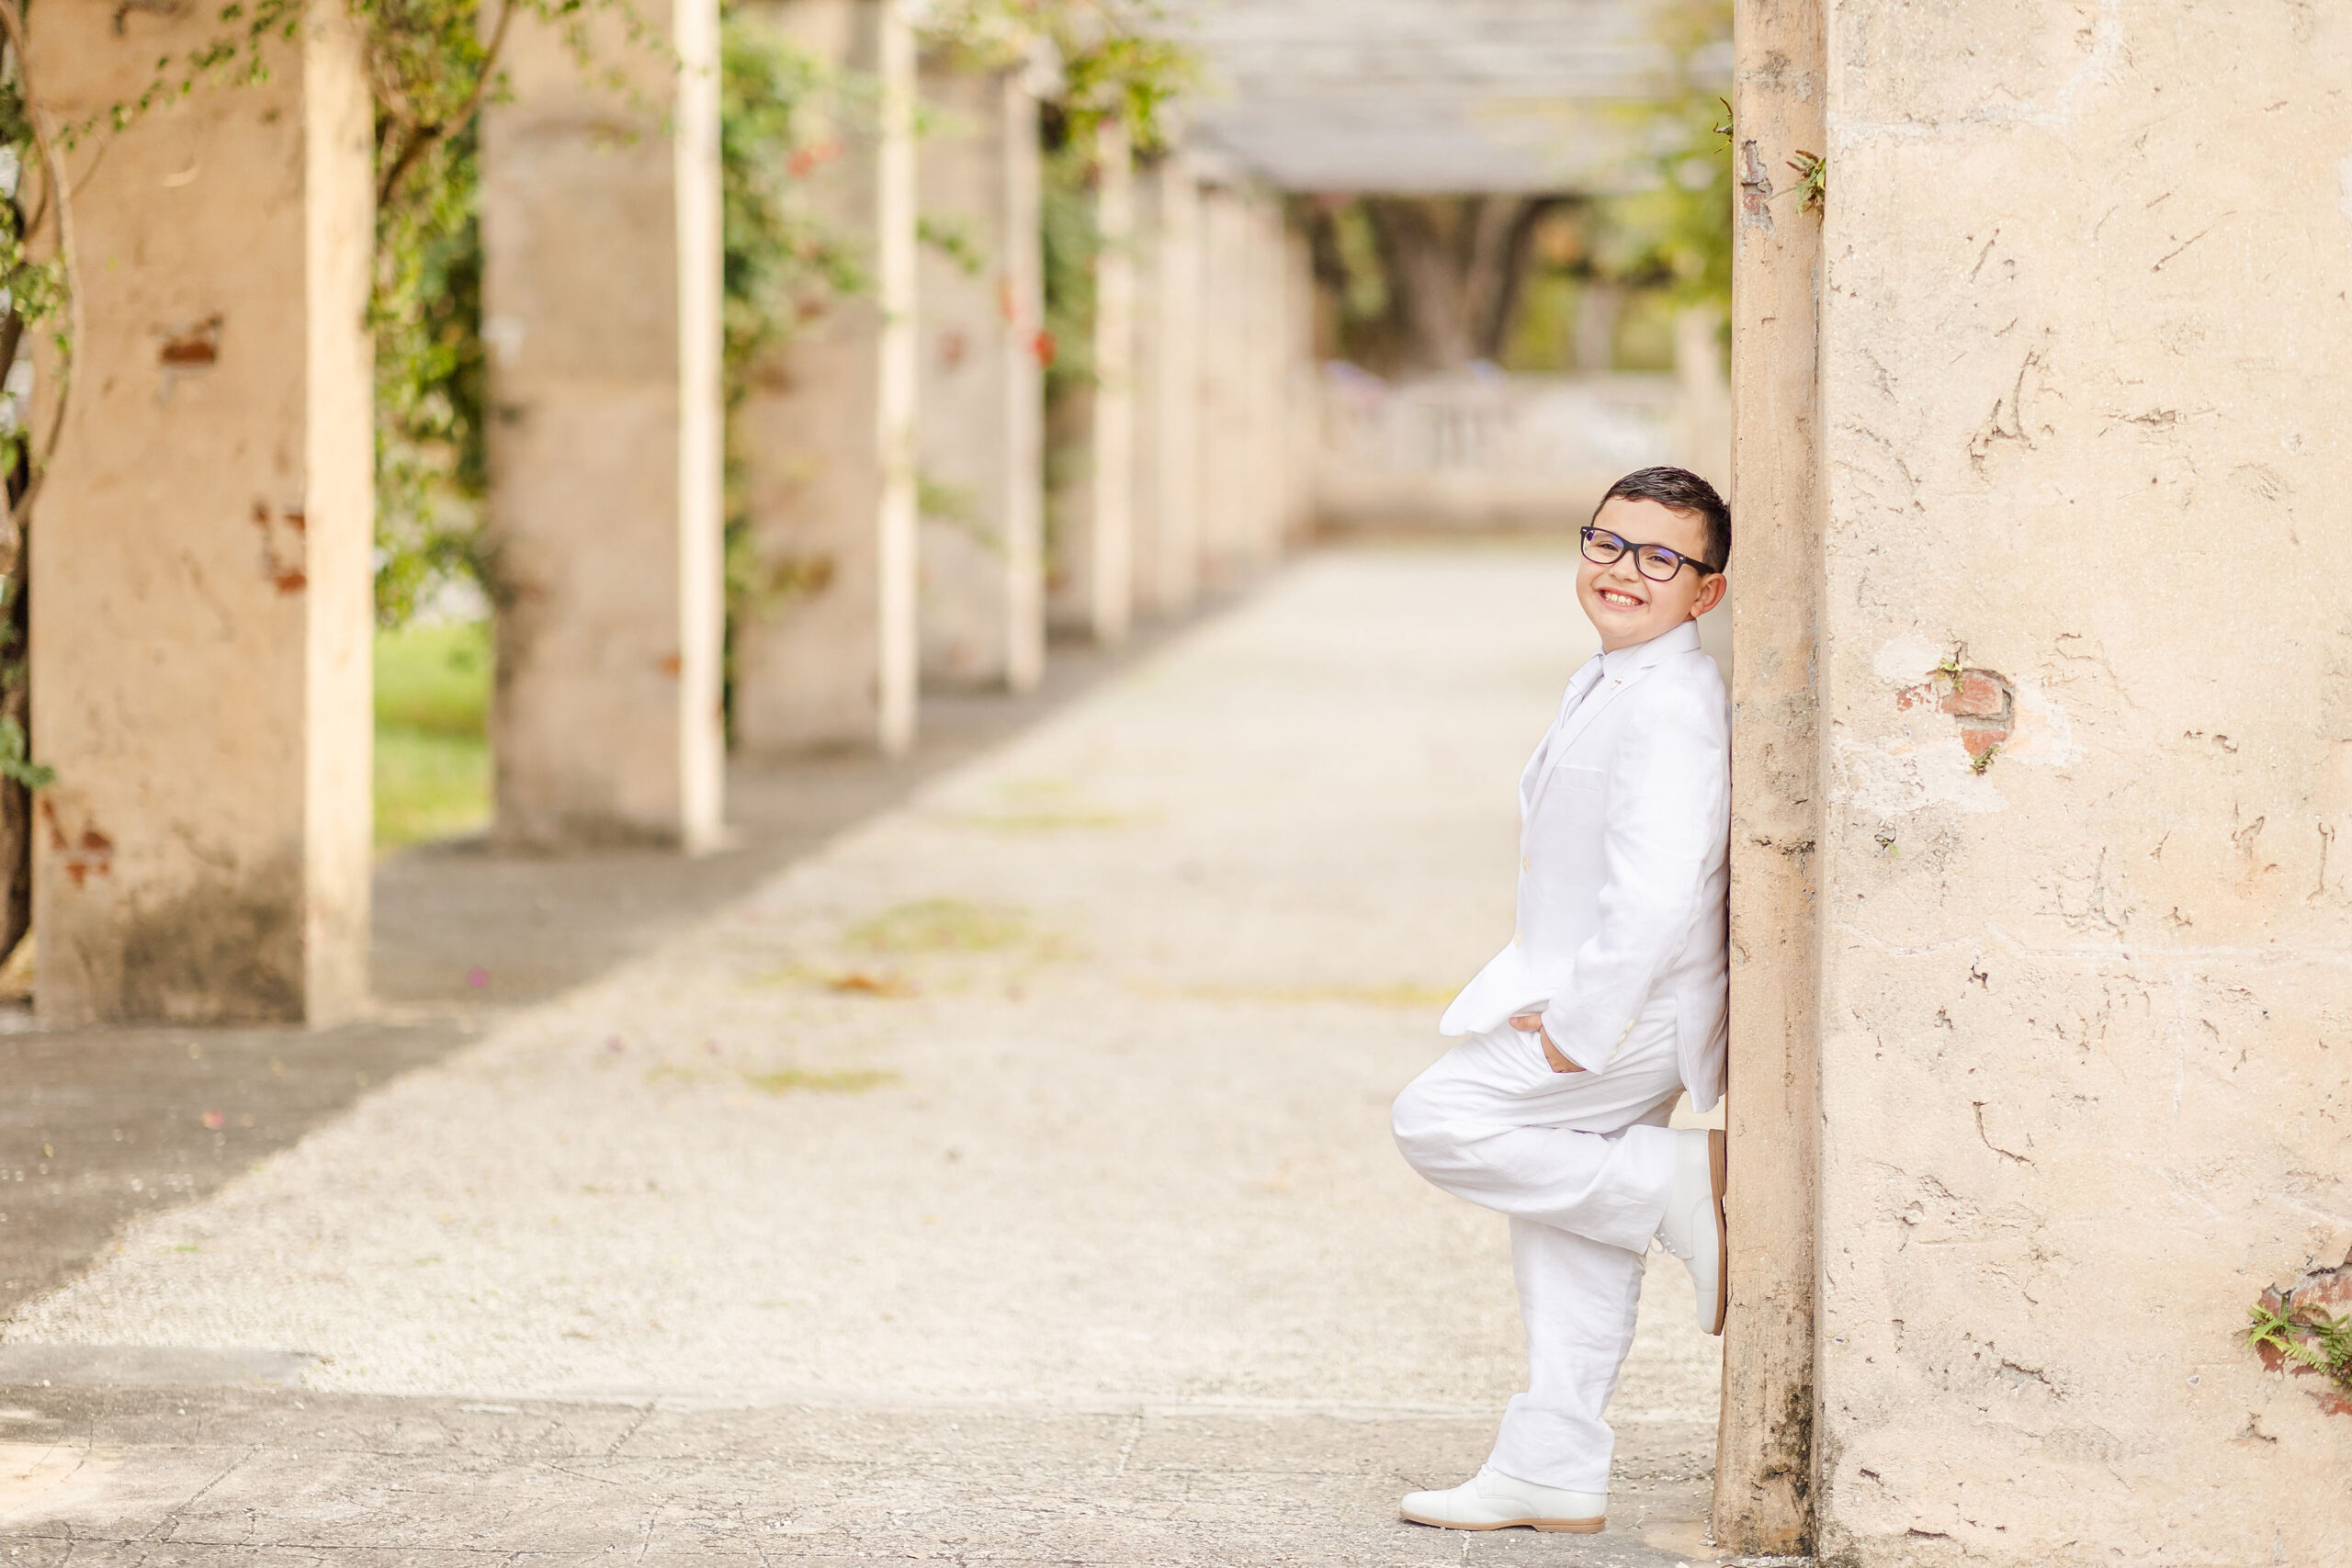 A boy in a full white suit leans against an old square column first communion stores in miami